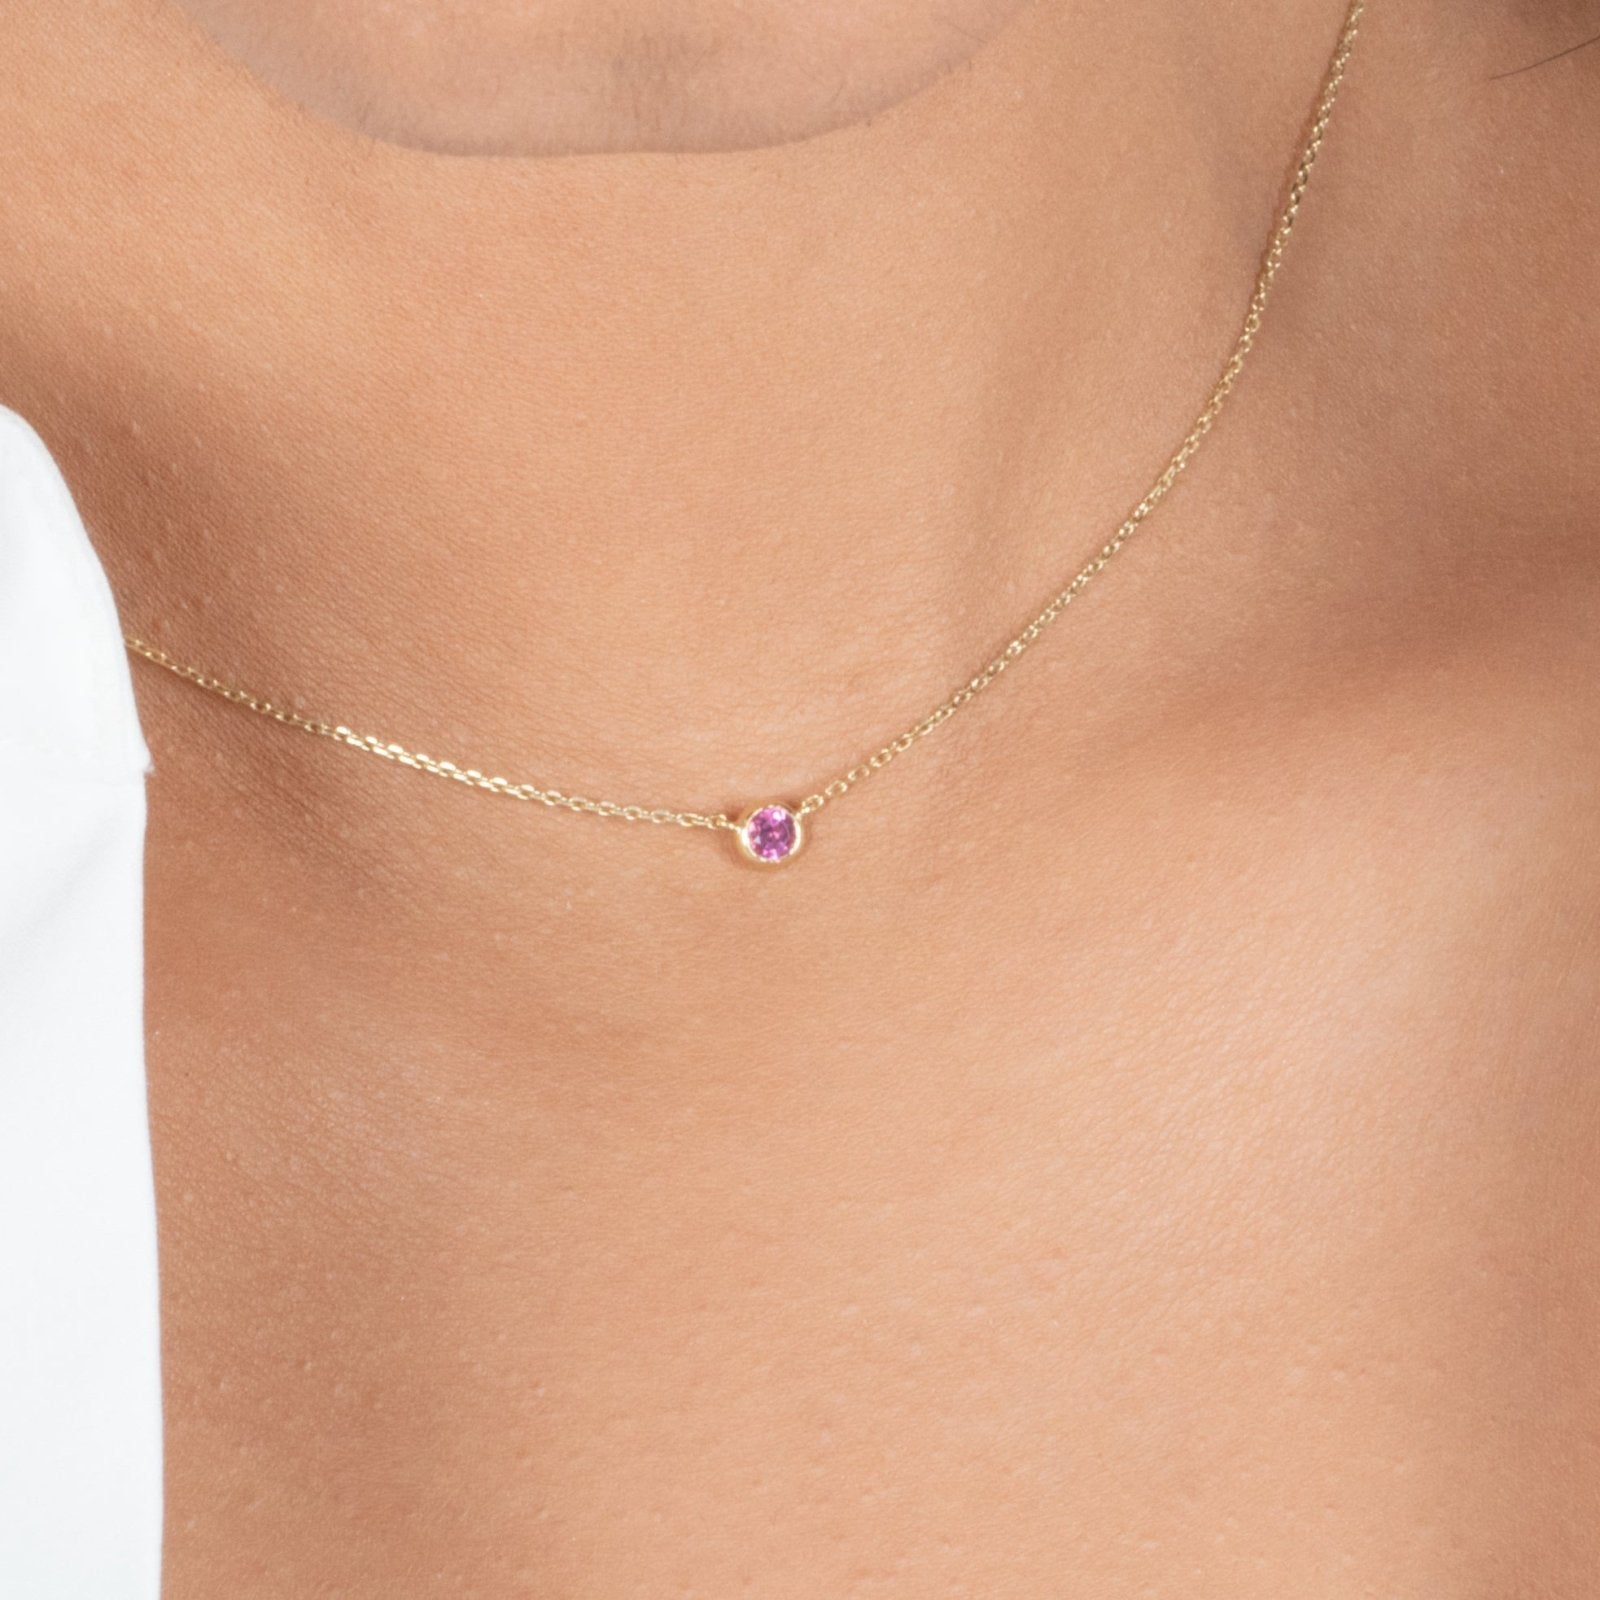 Pink Tourmaline Station Necklace Bezel Set in 14k Gold Necklaces Estella Collection #product_description# 18419 14k Birthstone Gemstone #tag4# #tag5# #tag6# #tag7# #tag8# #tag9# #tag10# 3MM